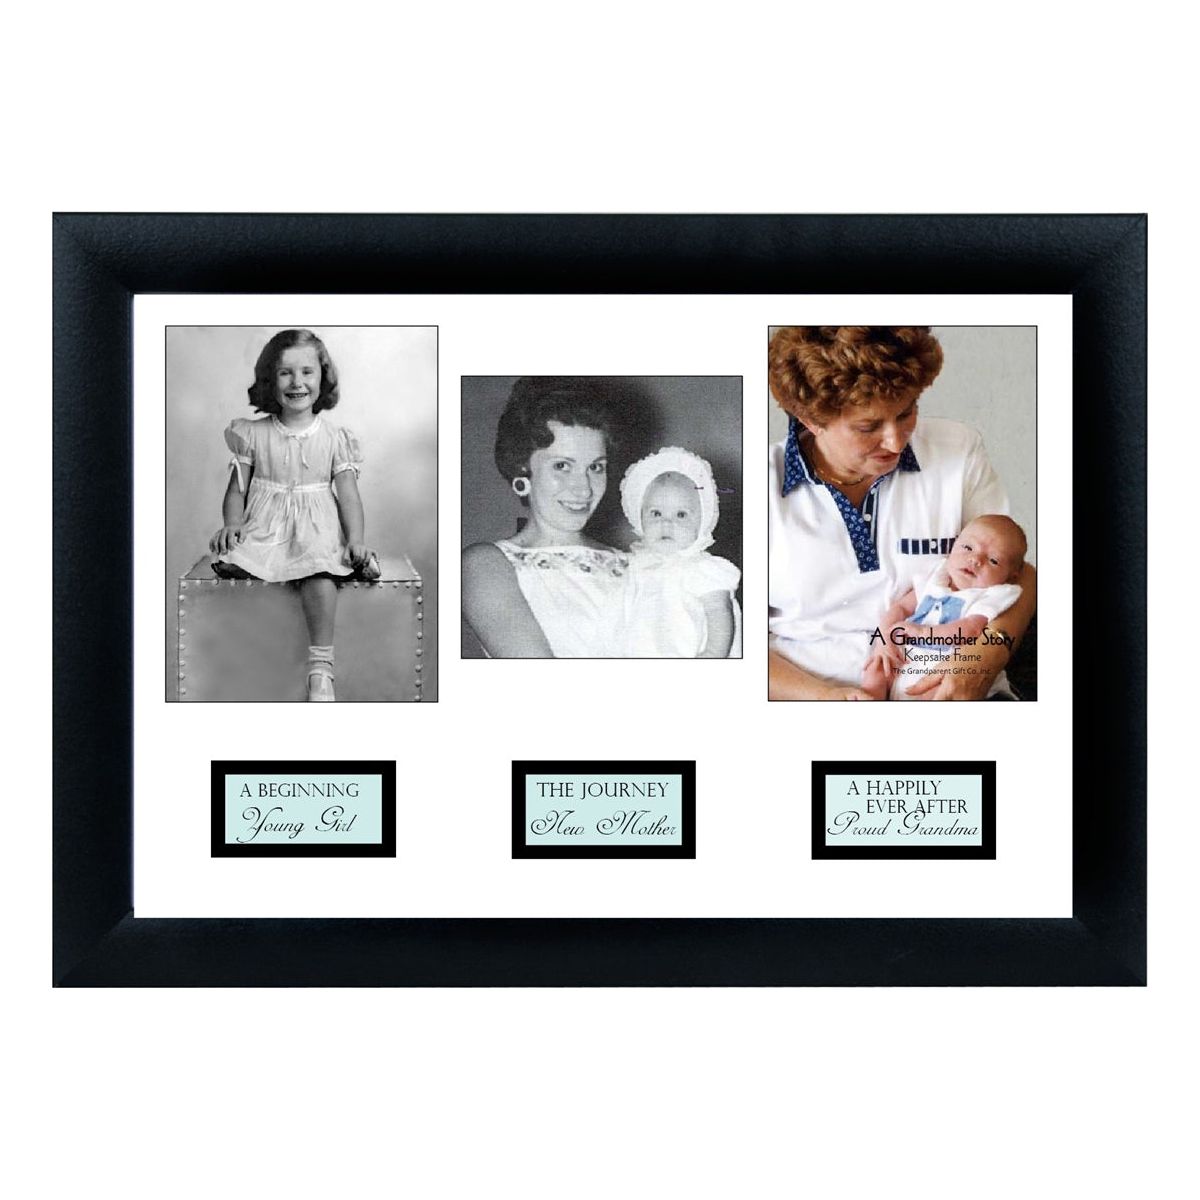 8x12 black frame for wall or table display with 3 spaces and captions for photos for a Grandma&#39;s life story.